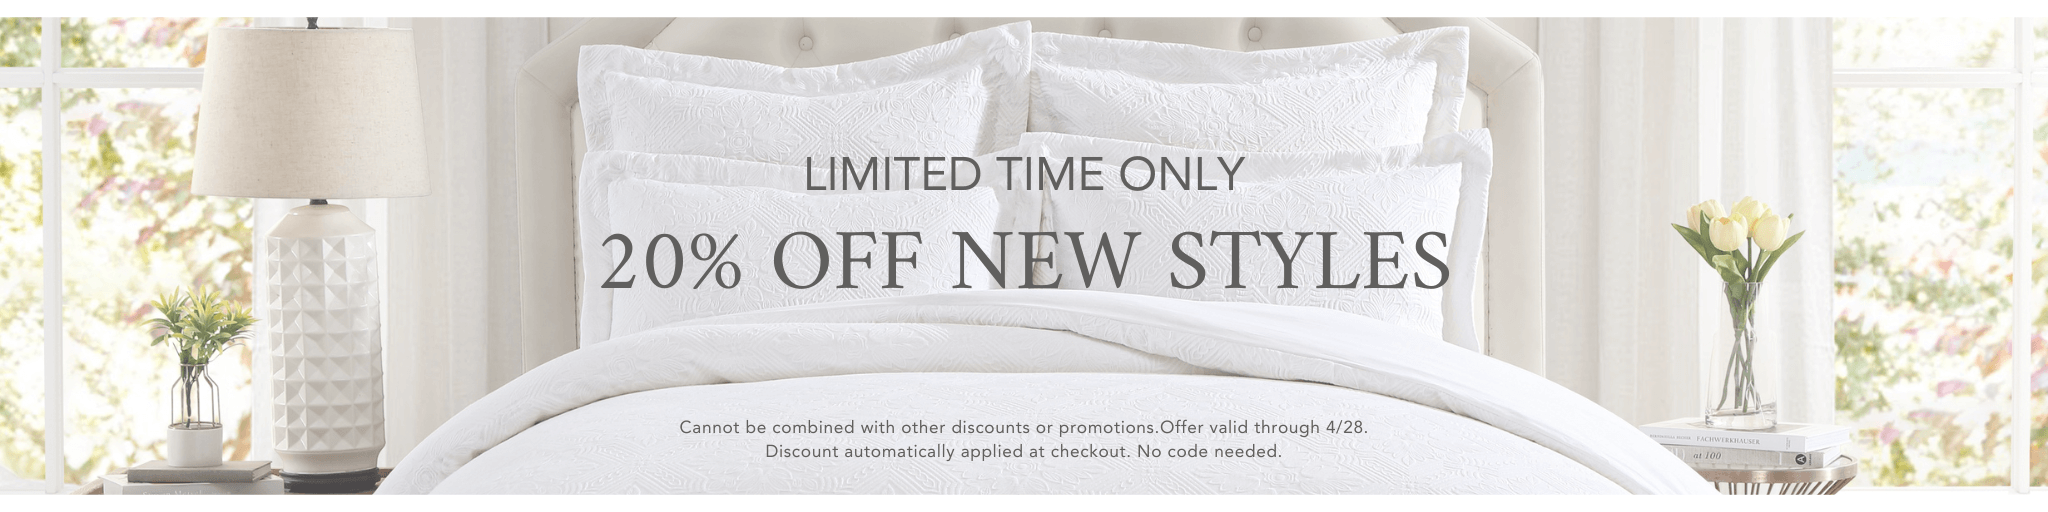 Limited Time Only: 20% Off New Styles through 4/28